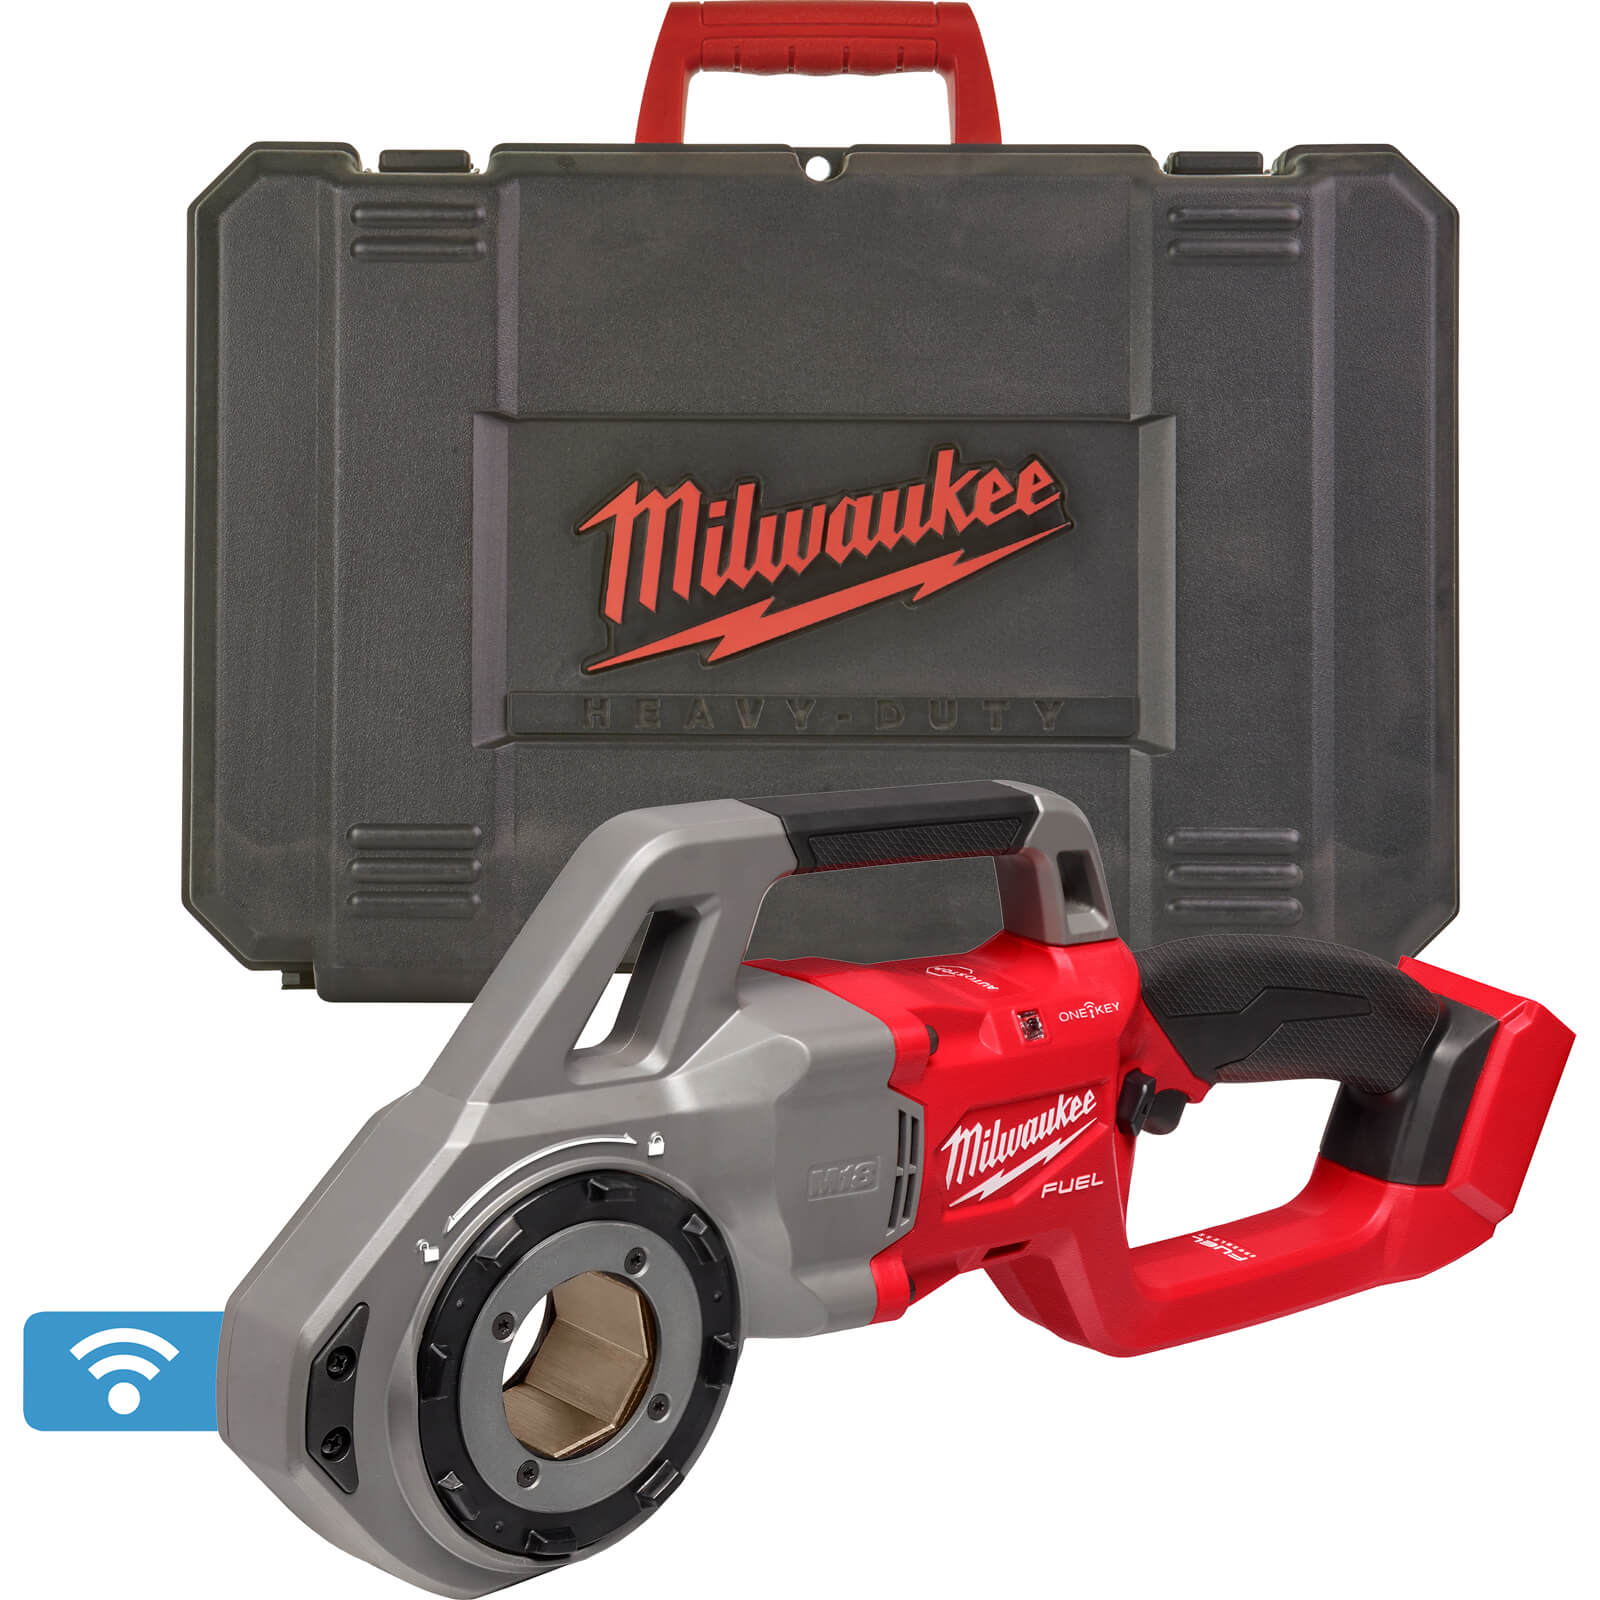 Milwaukee M18 FPT114 Fuel 18v Cordless Brushless Pipe Threader No Batteries No Charger Case